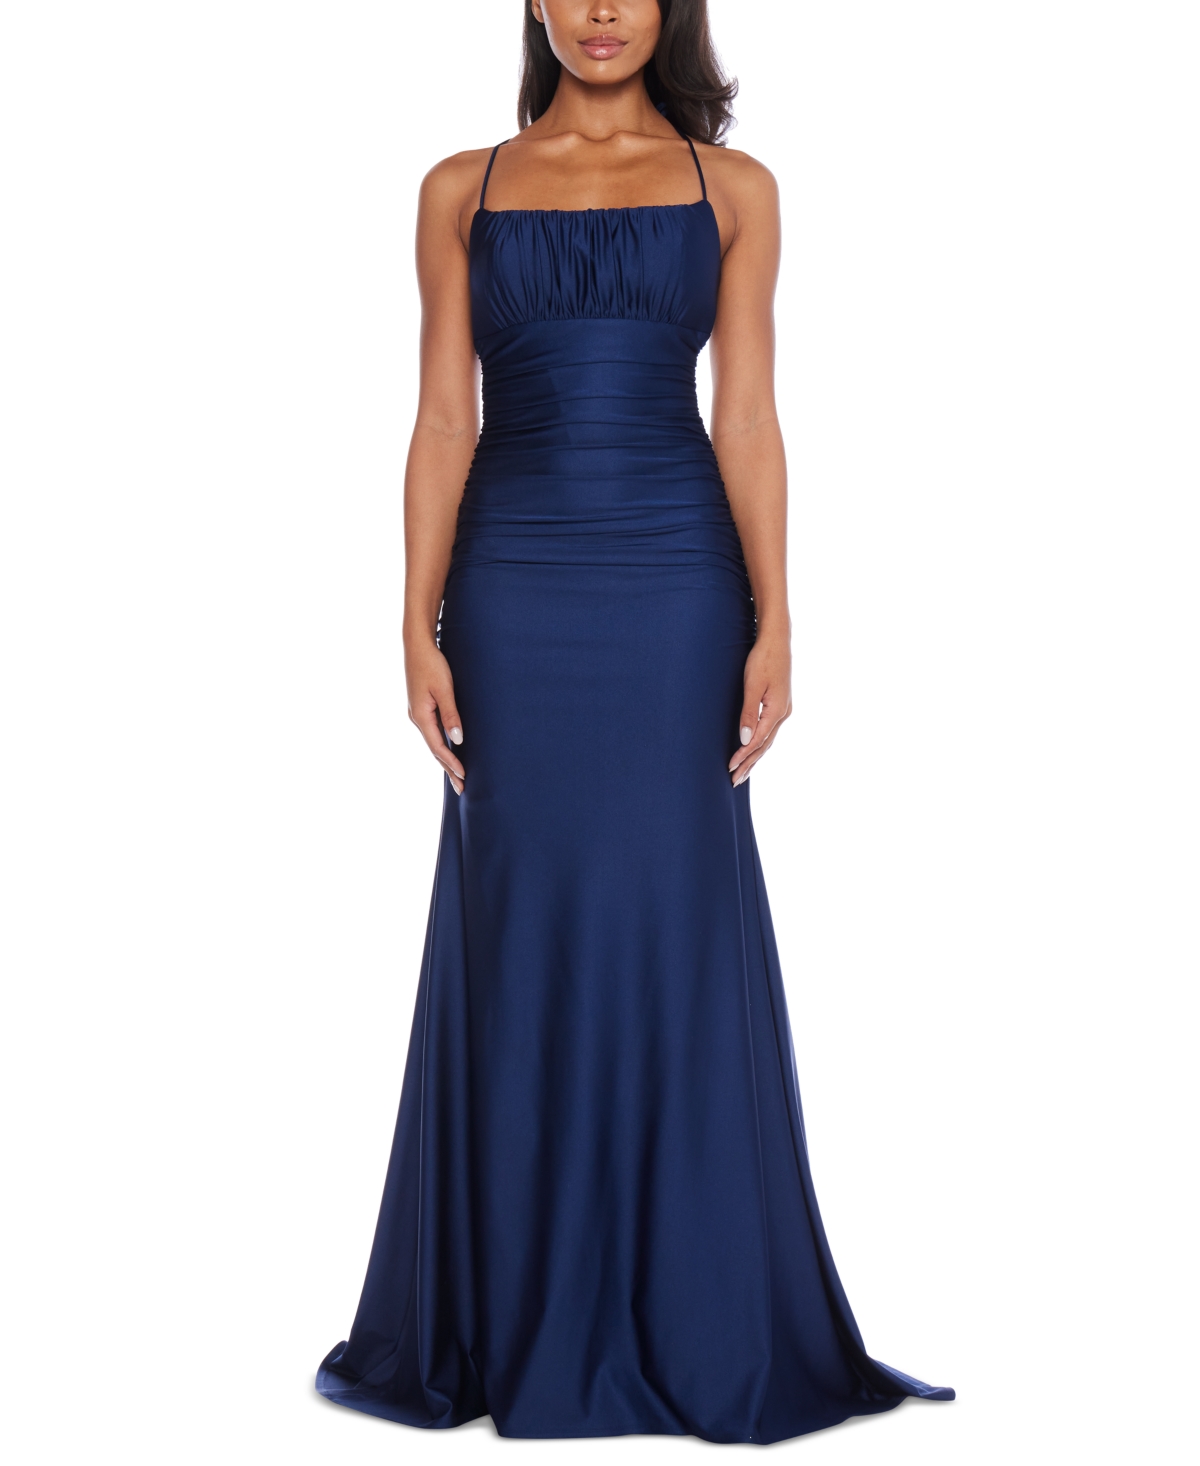 Juniors' Square-Neck Ruched Strappy Sleeveless Gown - Navy